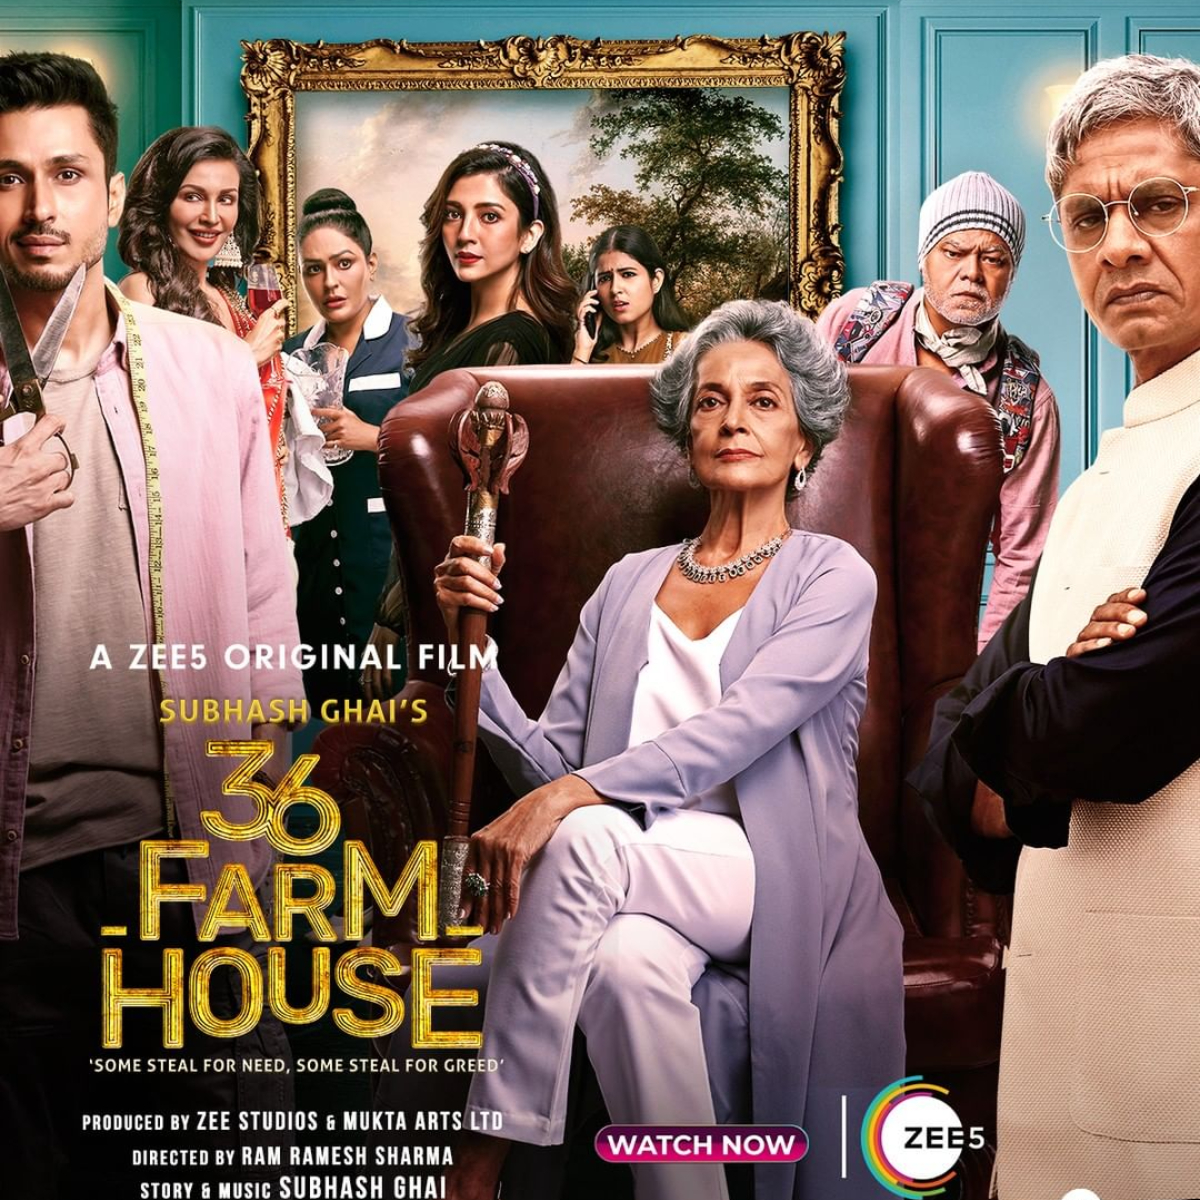 36 Farmhouse Review: Subhash Ghai’s tone-deaf comedy drama elicits major disappointment and zero laughs